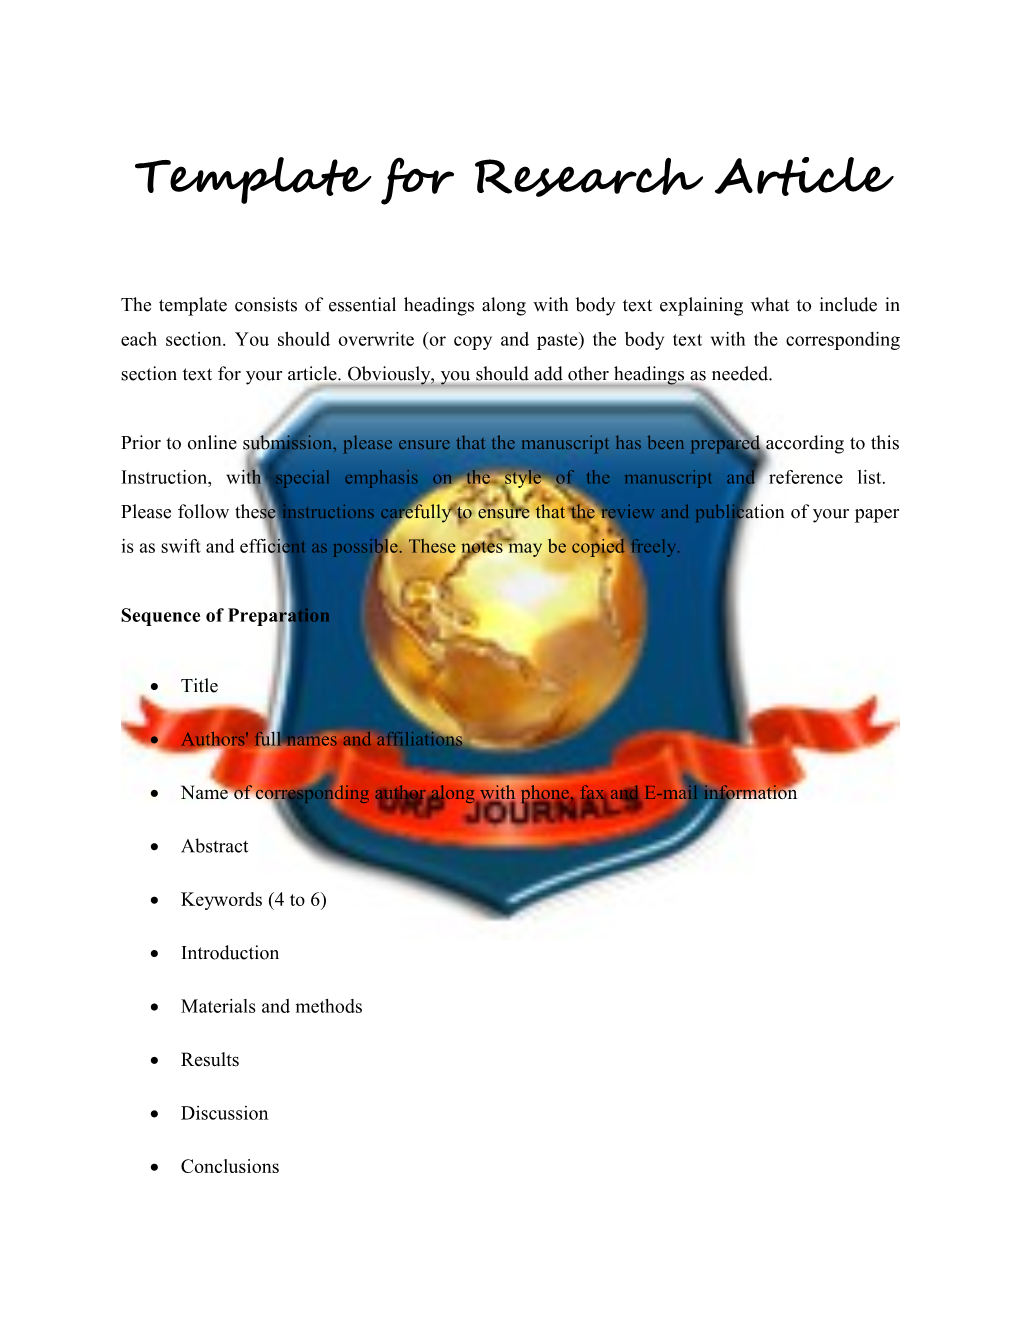 Template for Research Article